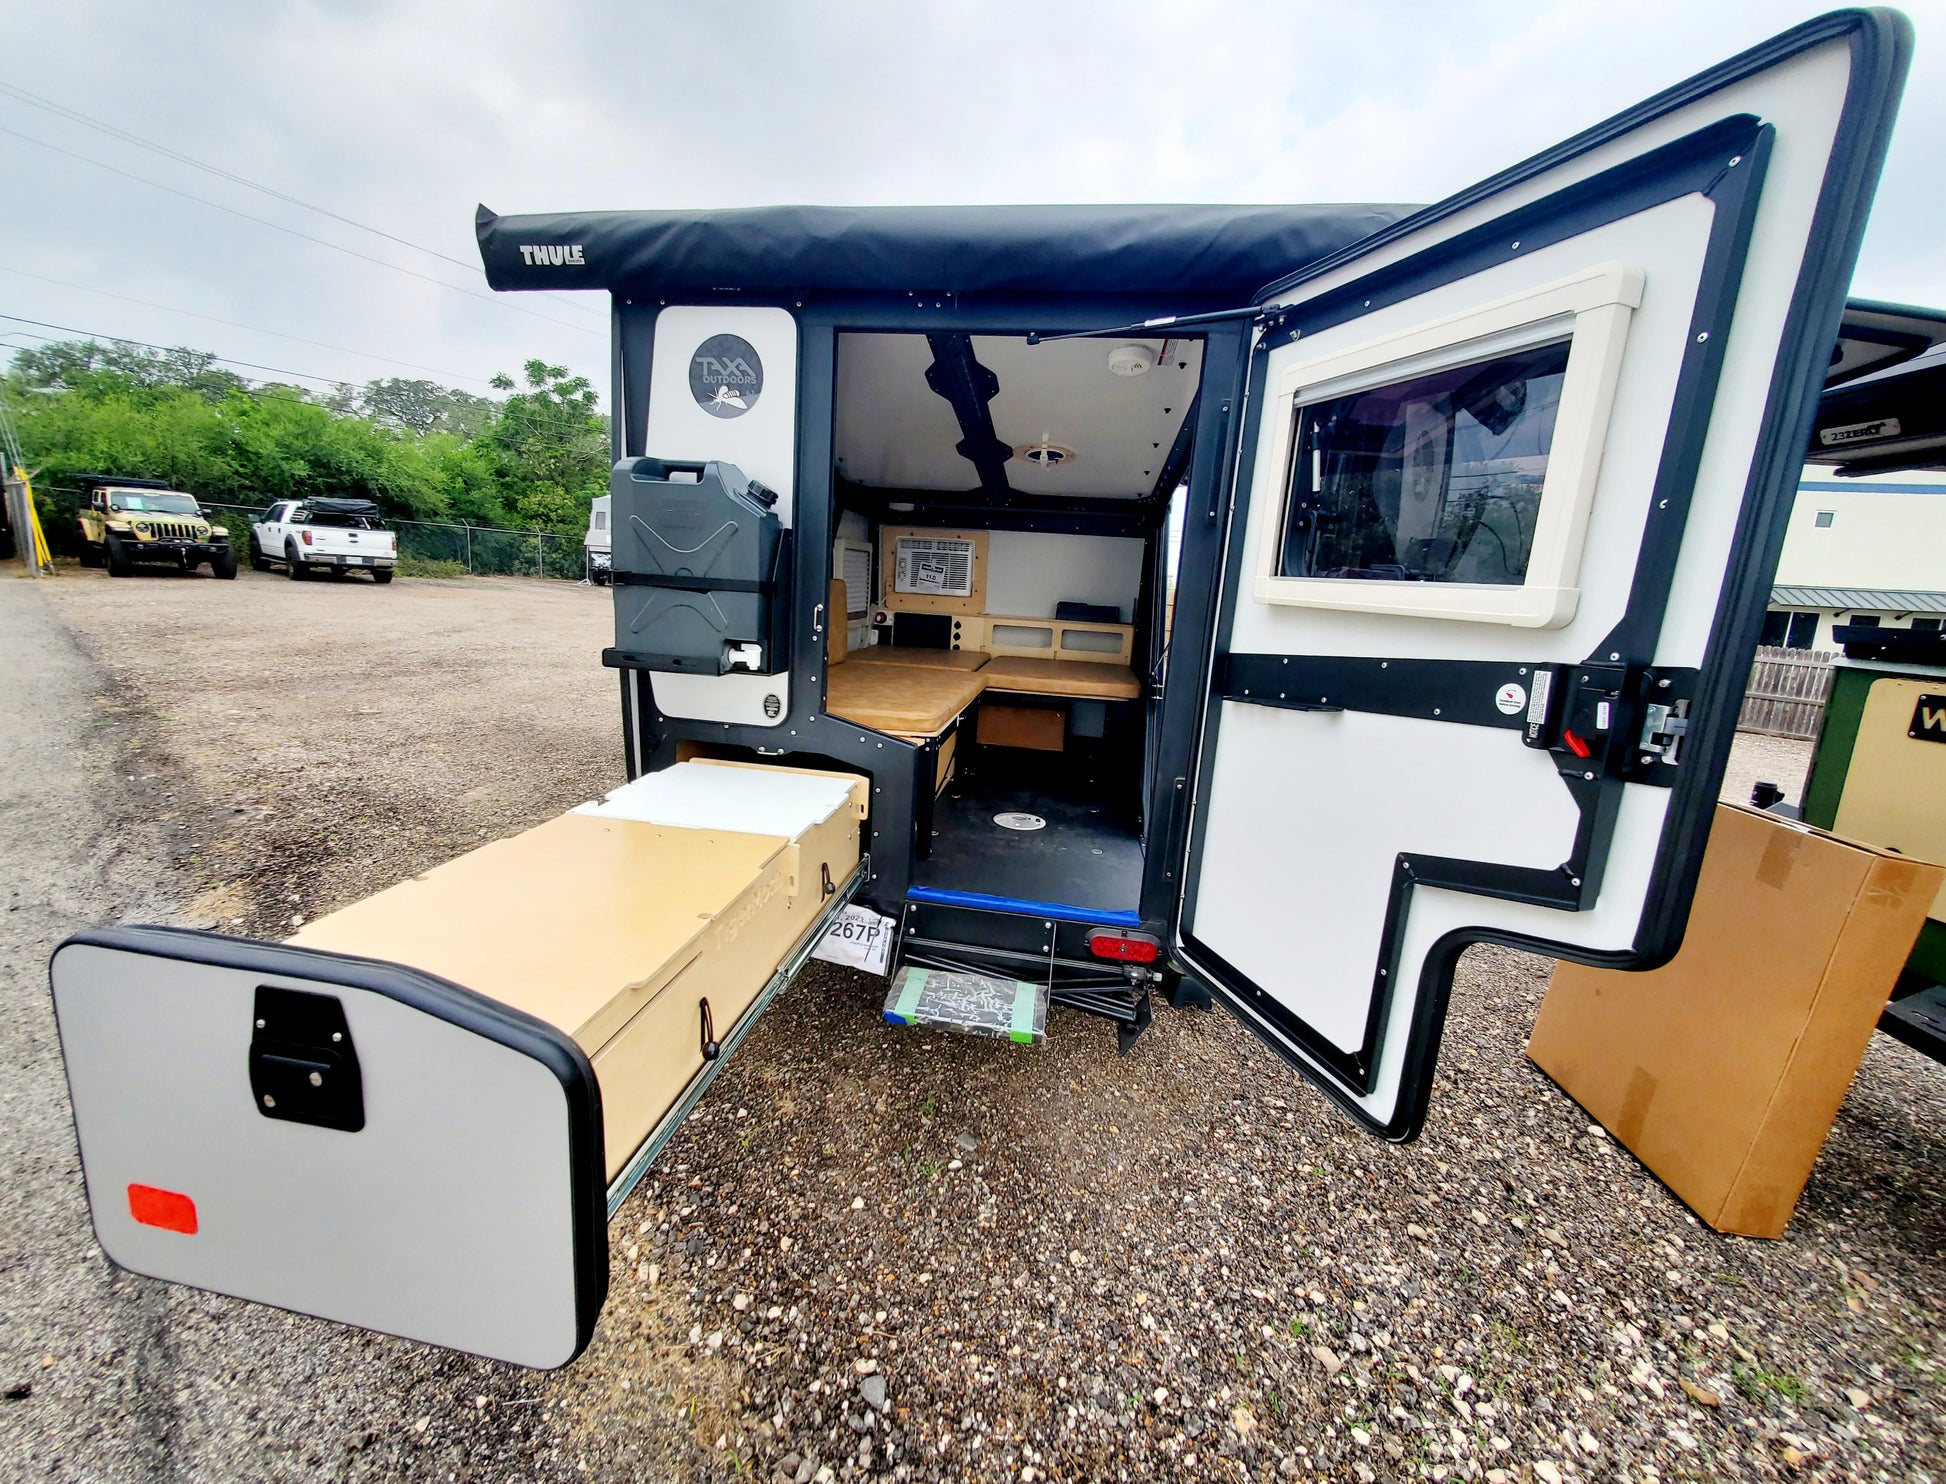 taxa outdoors tigermoth overland offroad air condtion trailer rv for sale near houston katy texas at hawkes outdoors 2102512882